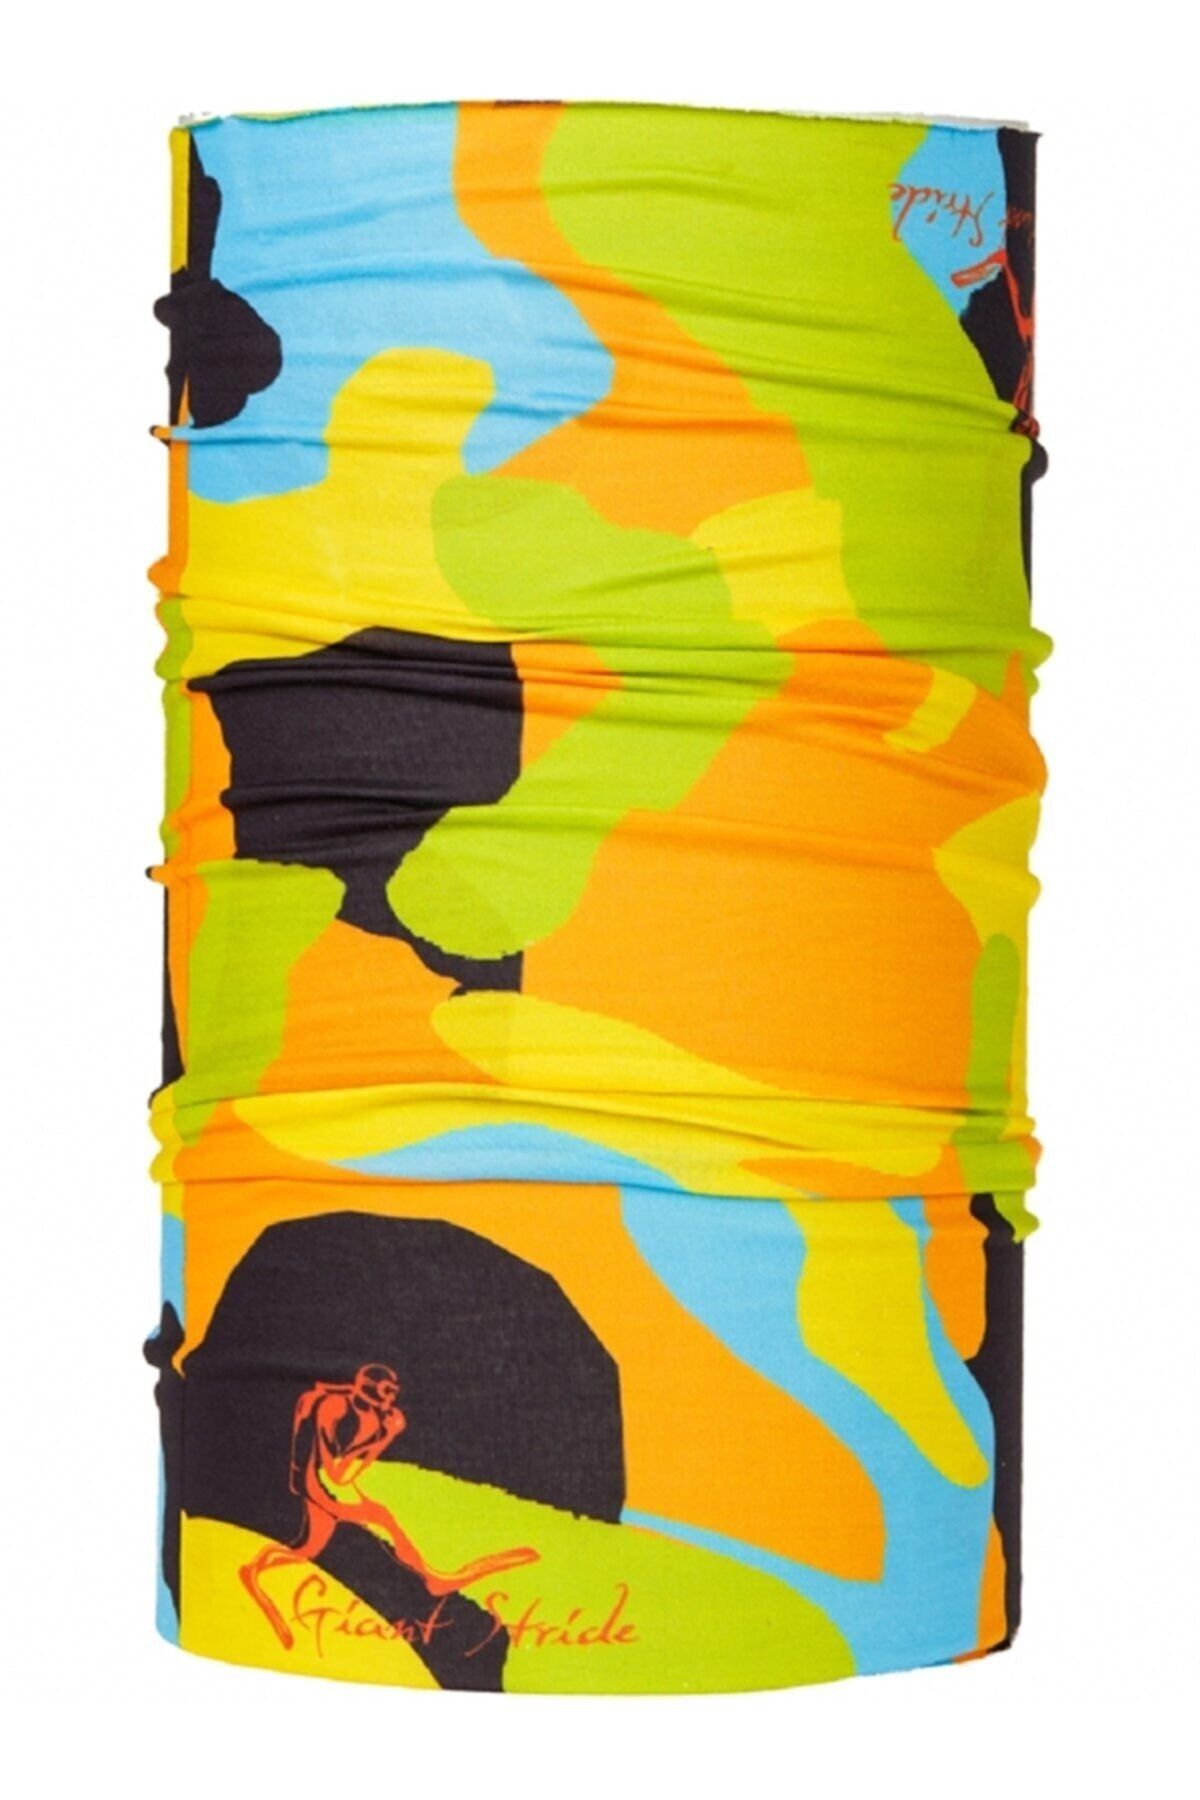 Giant Stride Scuba Tube Camouflage Color